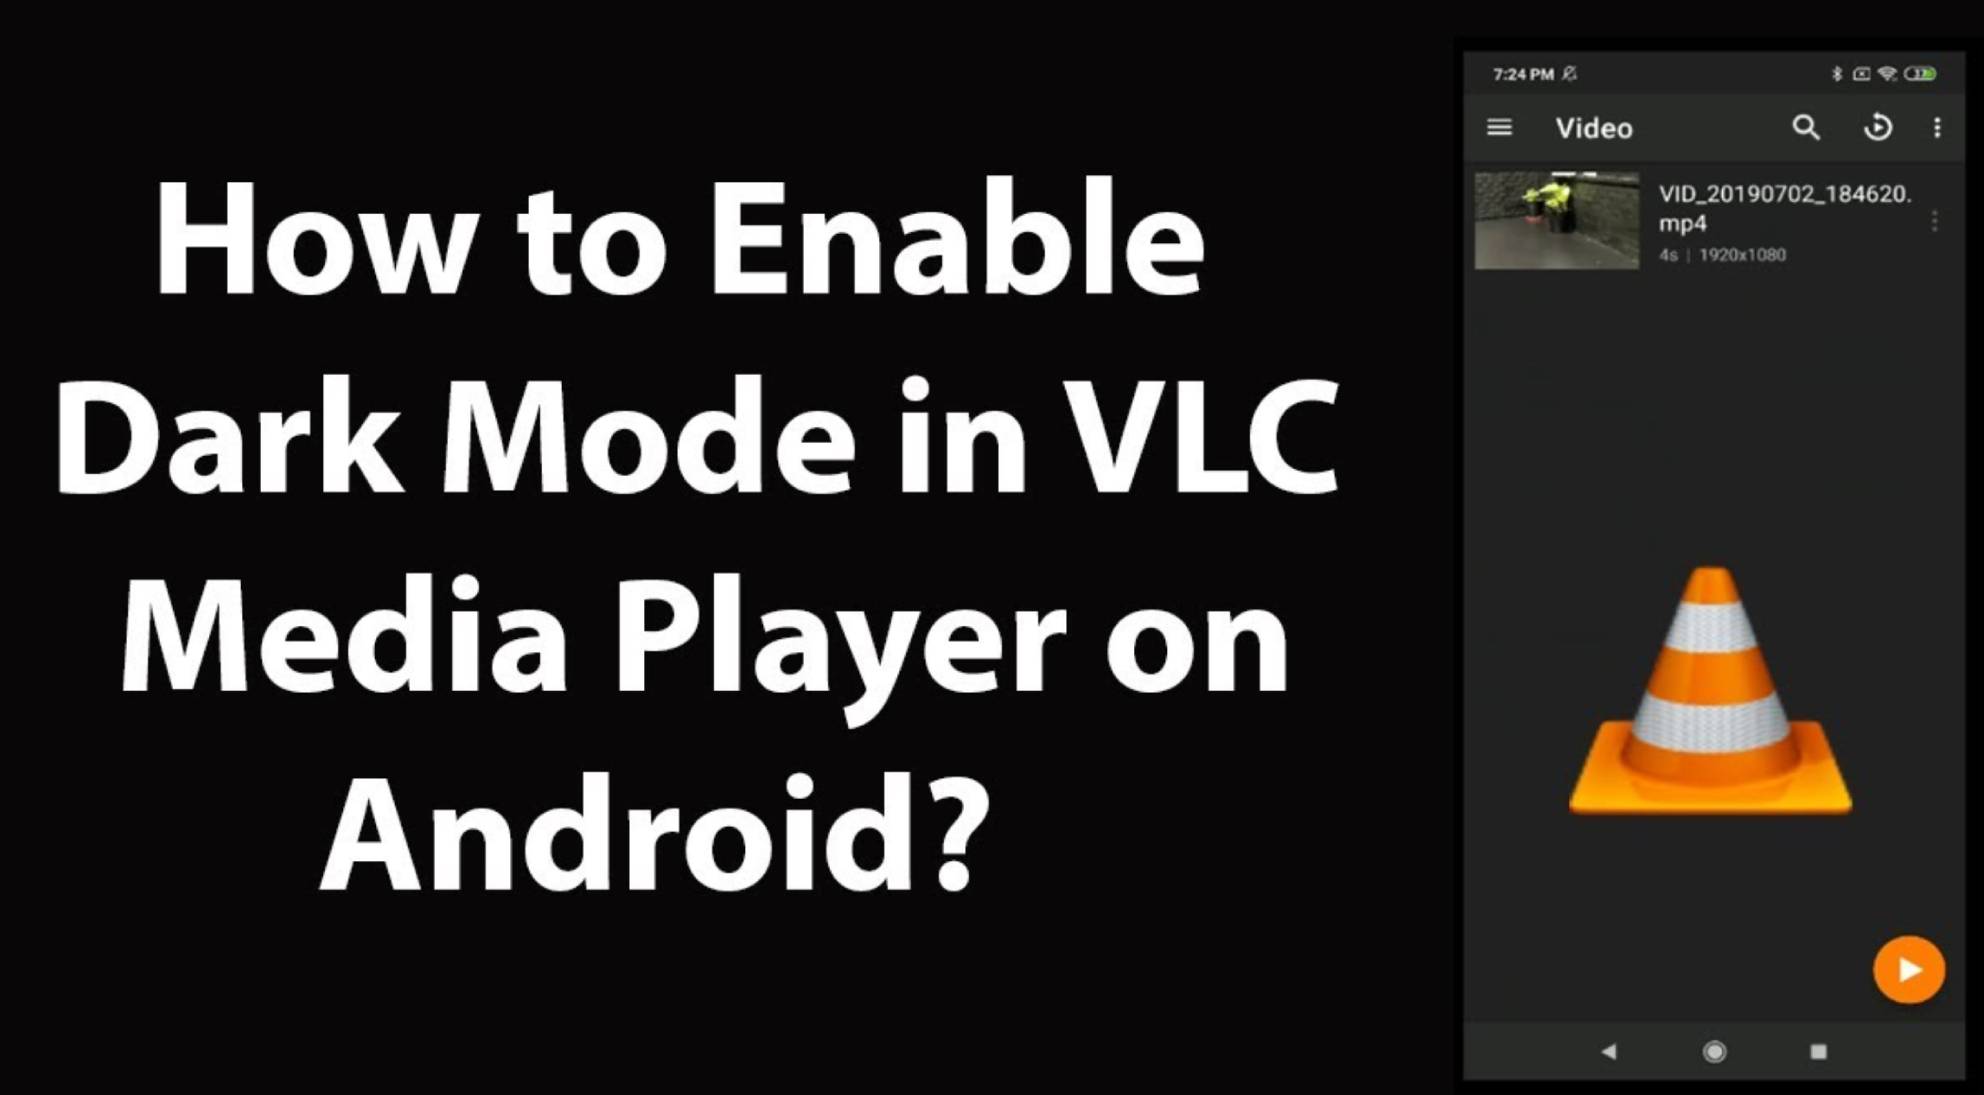 How To Enable Dark Mode In VLC